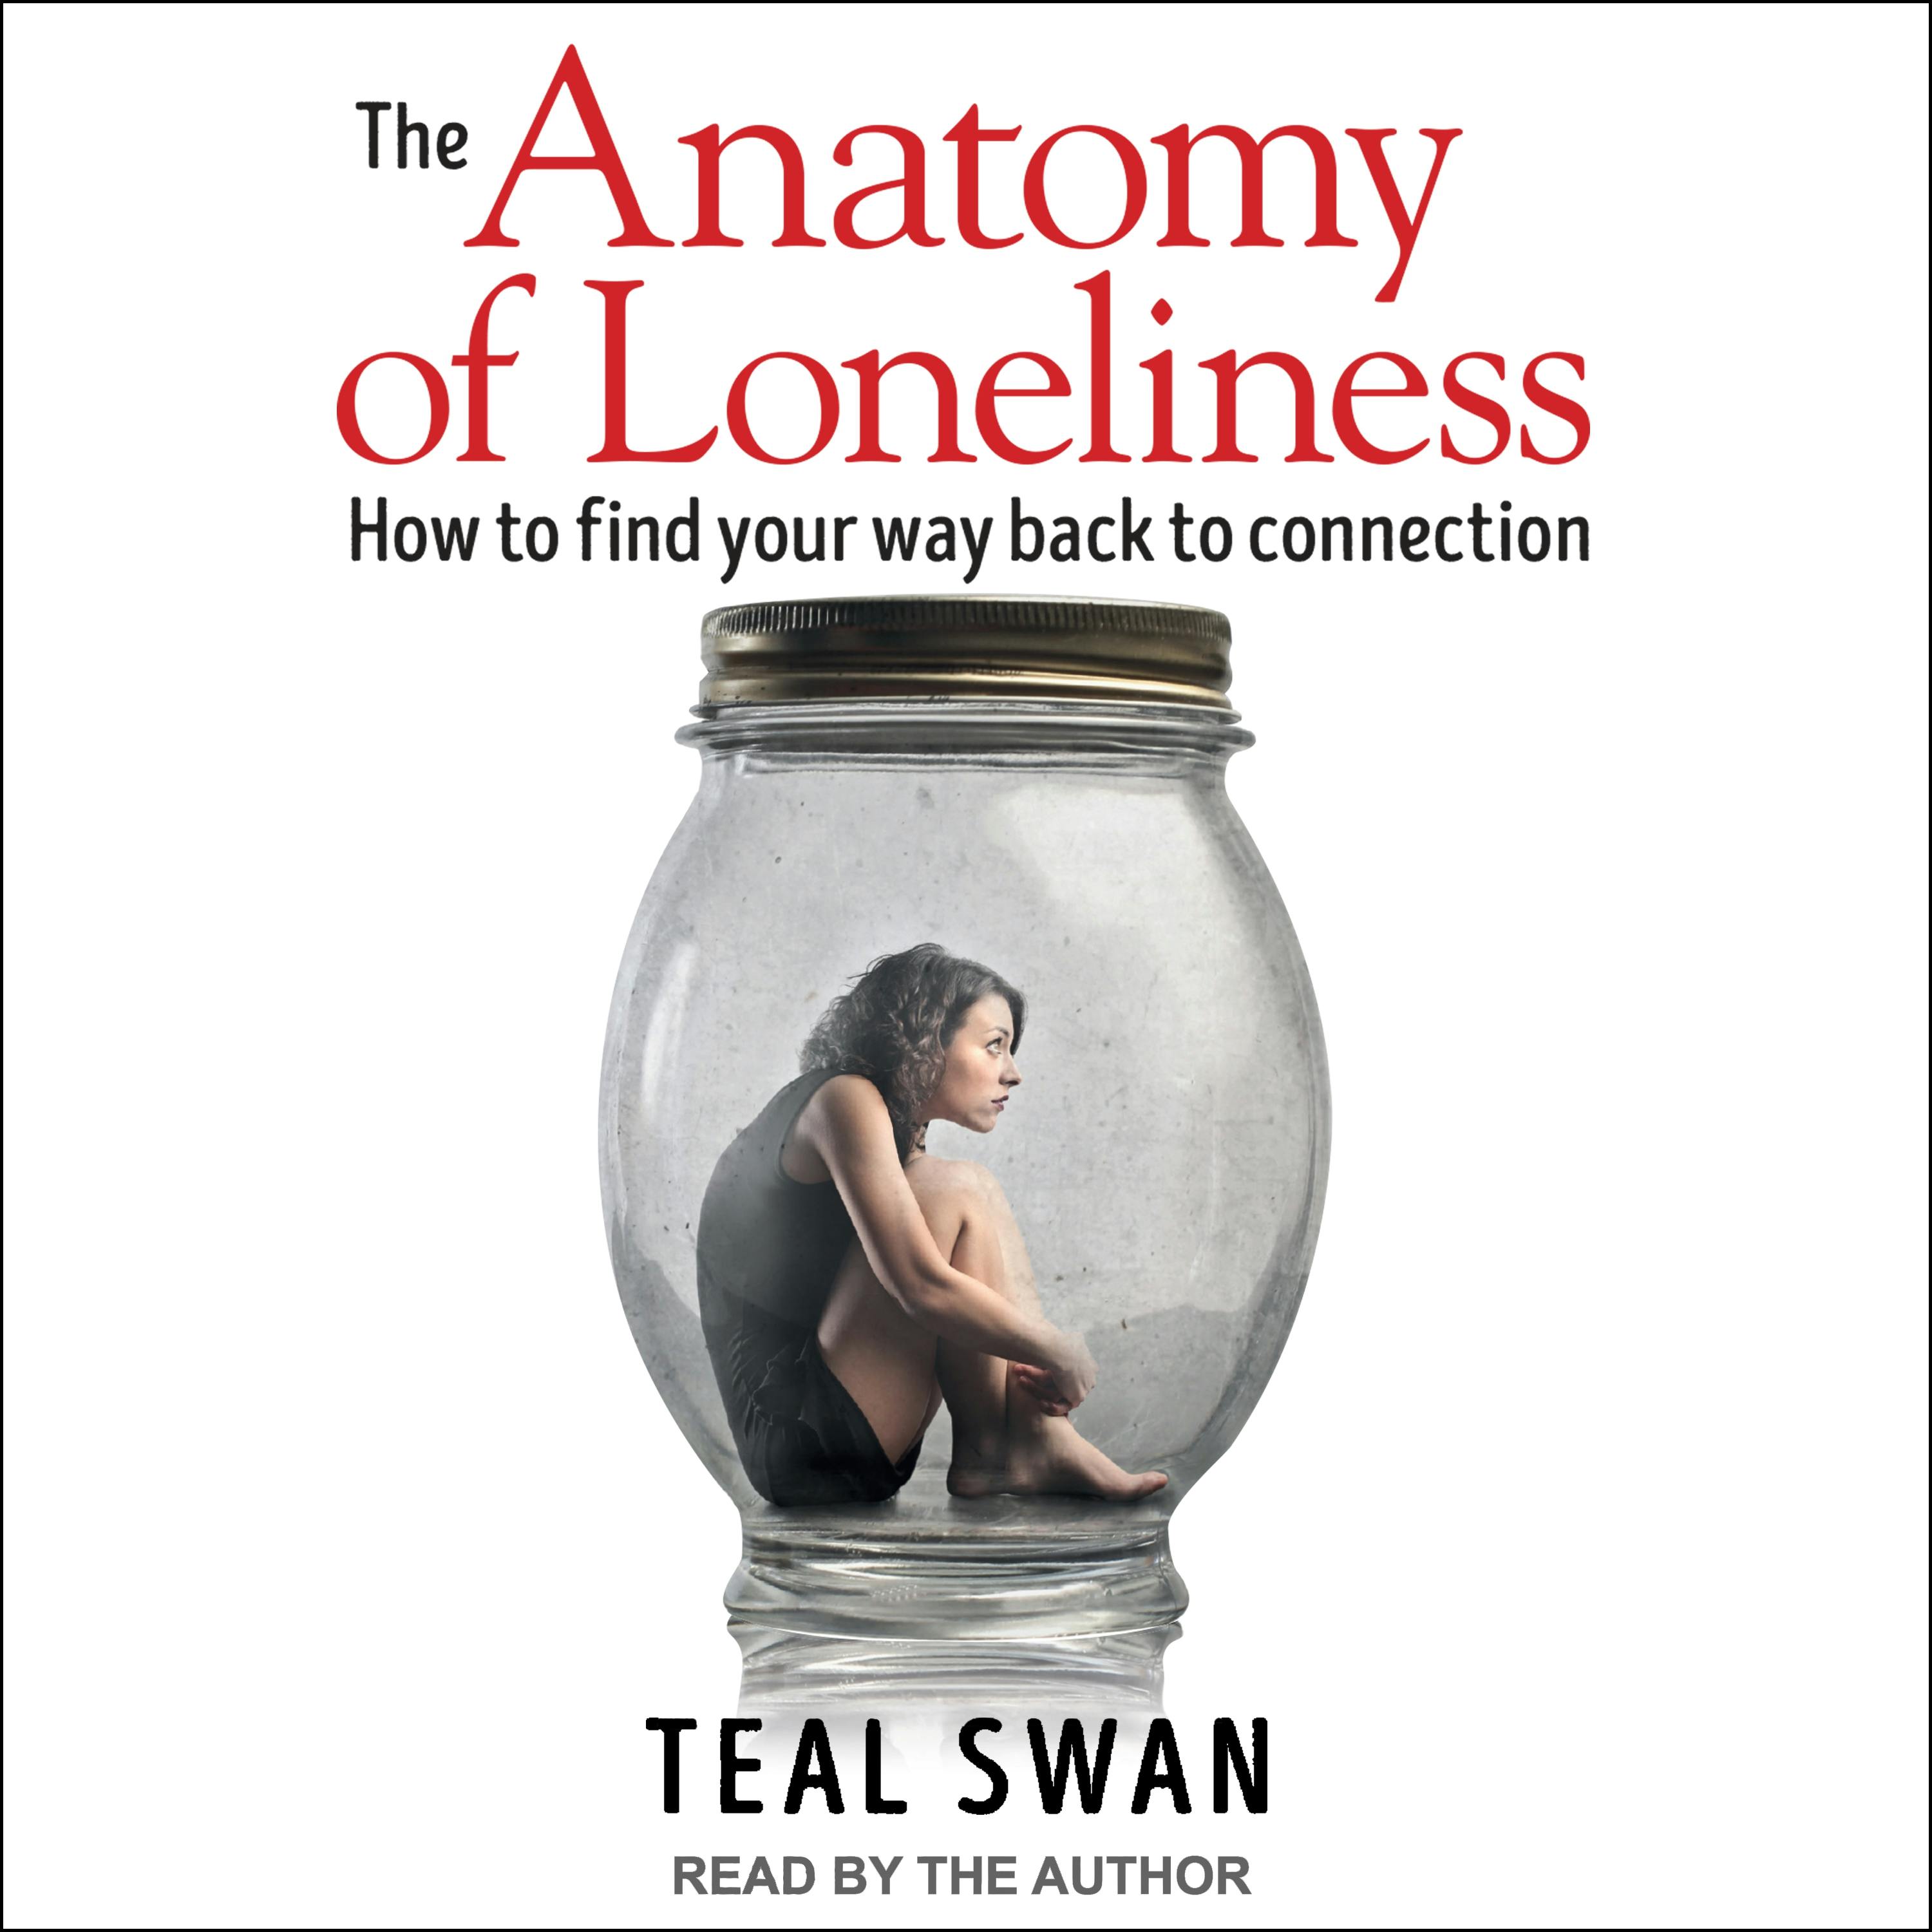 The Anatomy of Loneliness: How to Find Your Way Back to Connection - Teal Swan